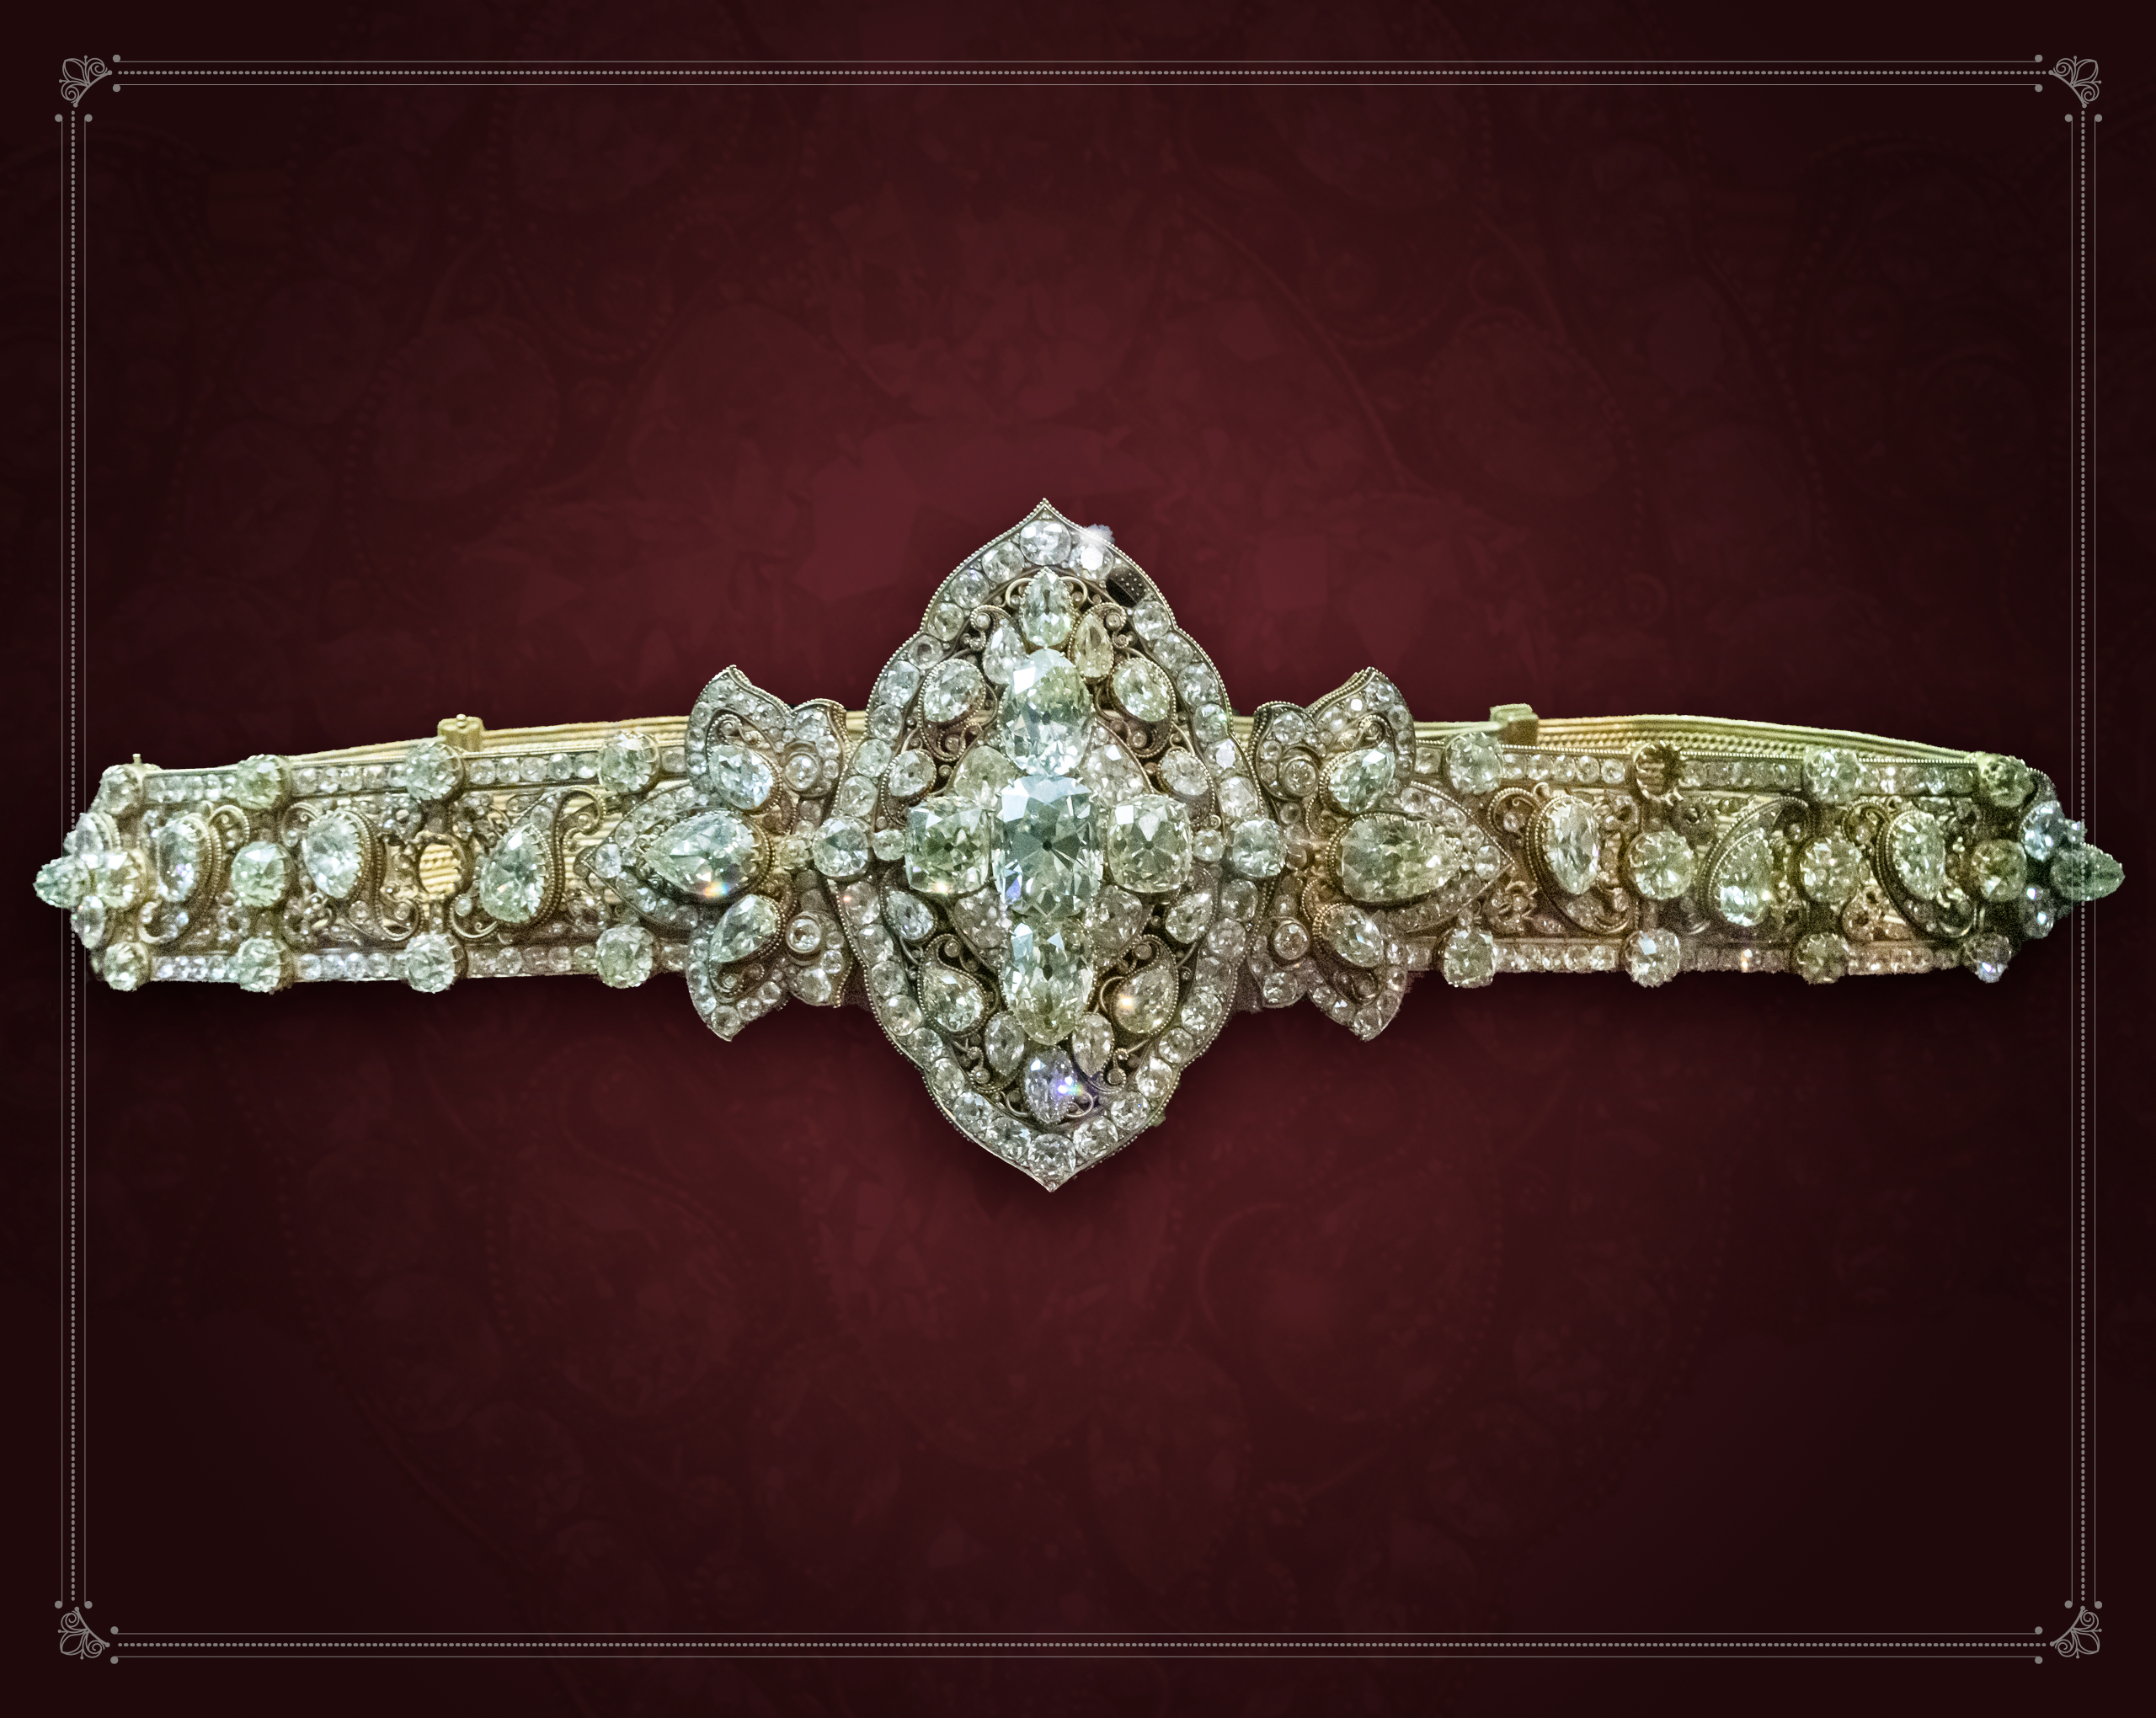 Gold belt encrusted with old-cut Natural Diamonds from the Golconda mines